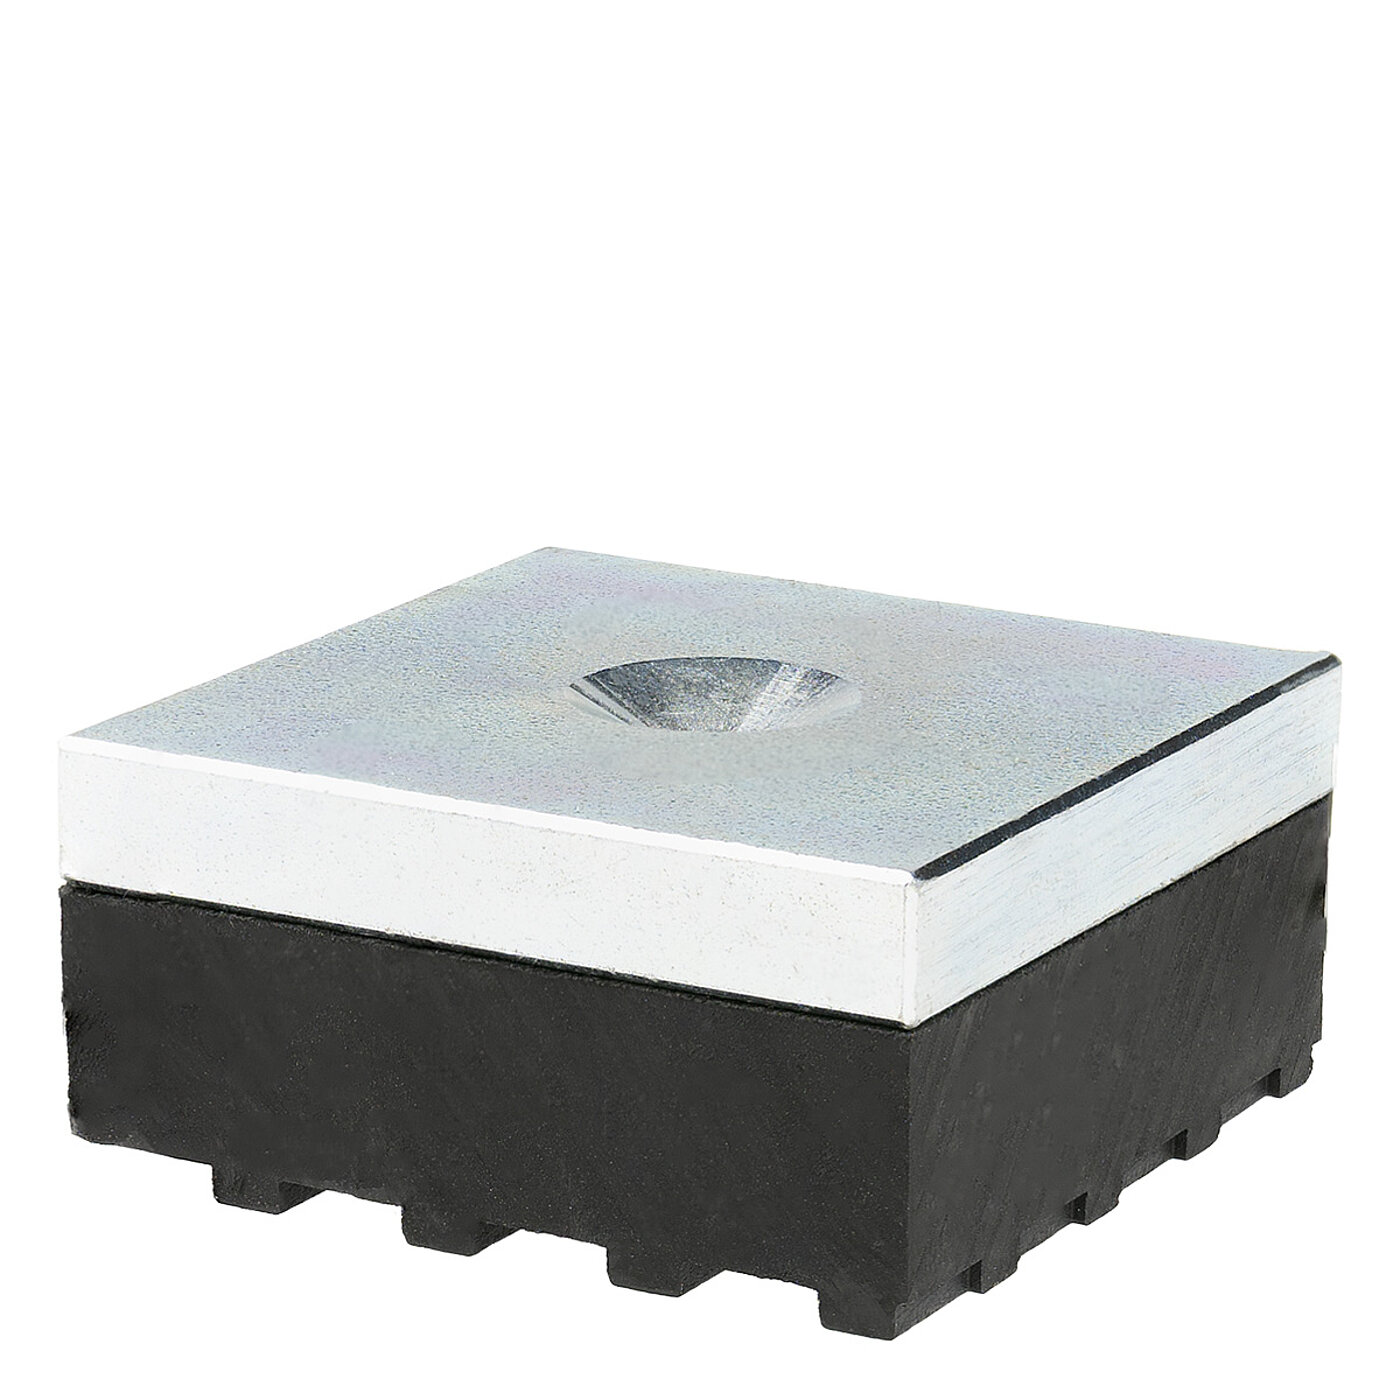 a square machine foot made of zinc-galvanized steel plate with black elastomer NBR at the bottom for vibration dampening and a 120 degree counter sinking on top for levelling screws, isolated on white background